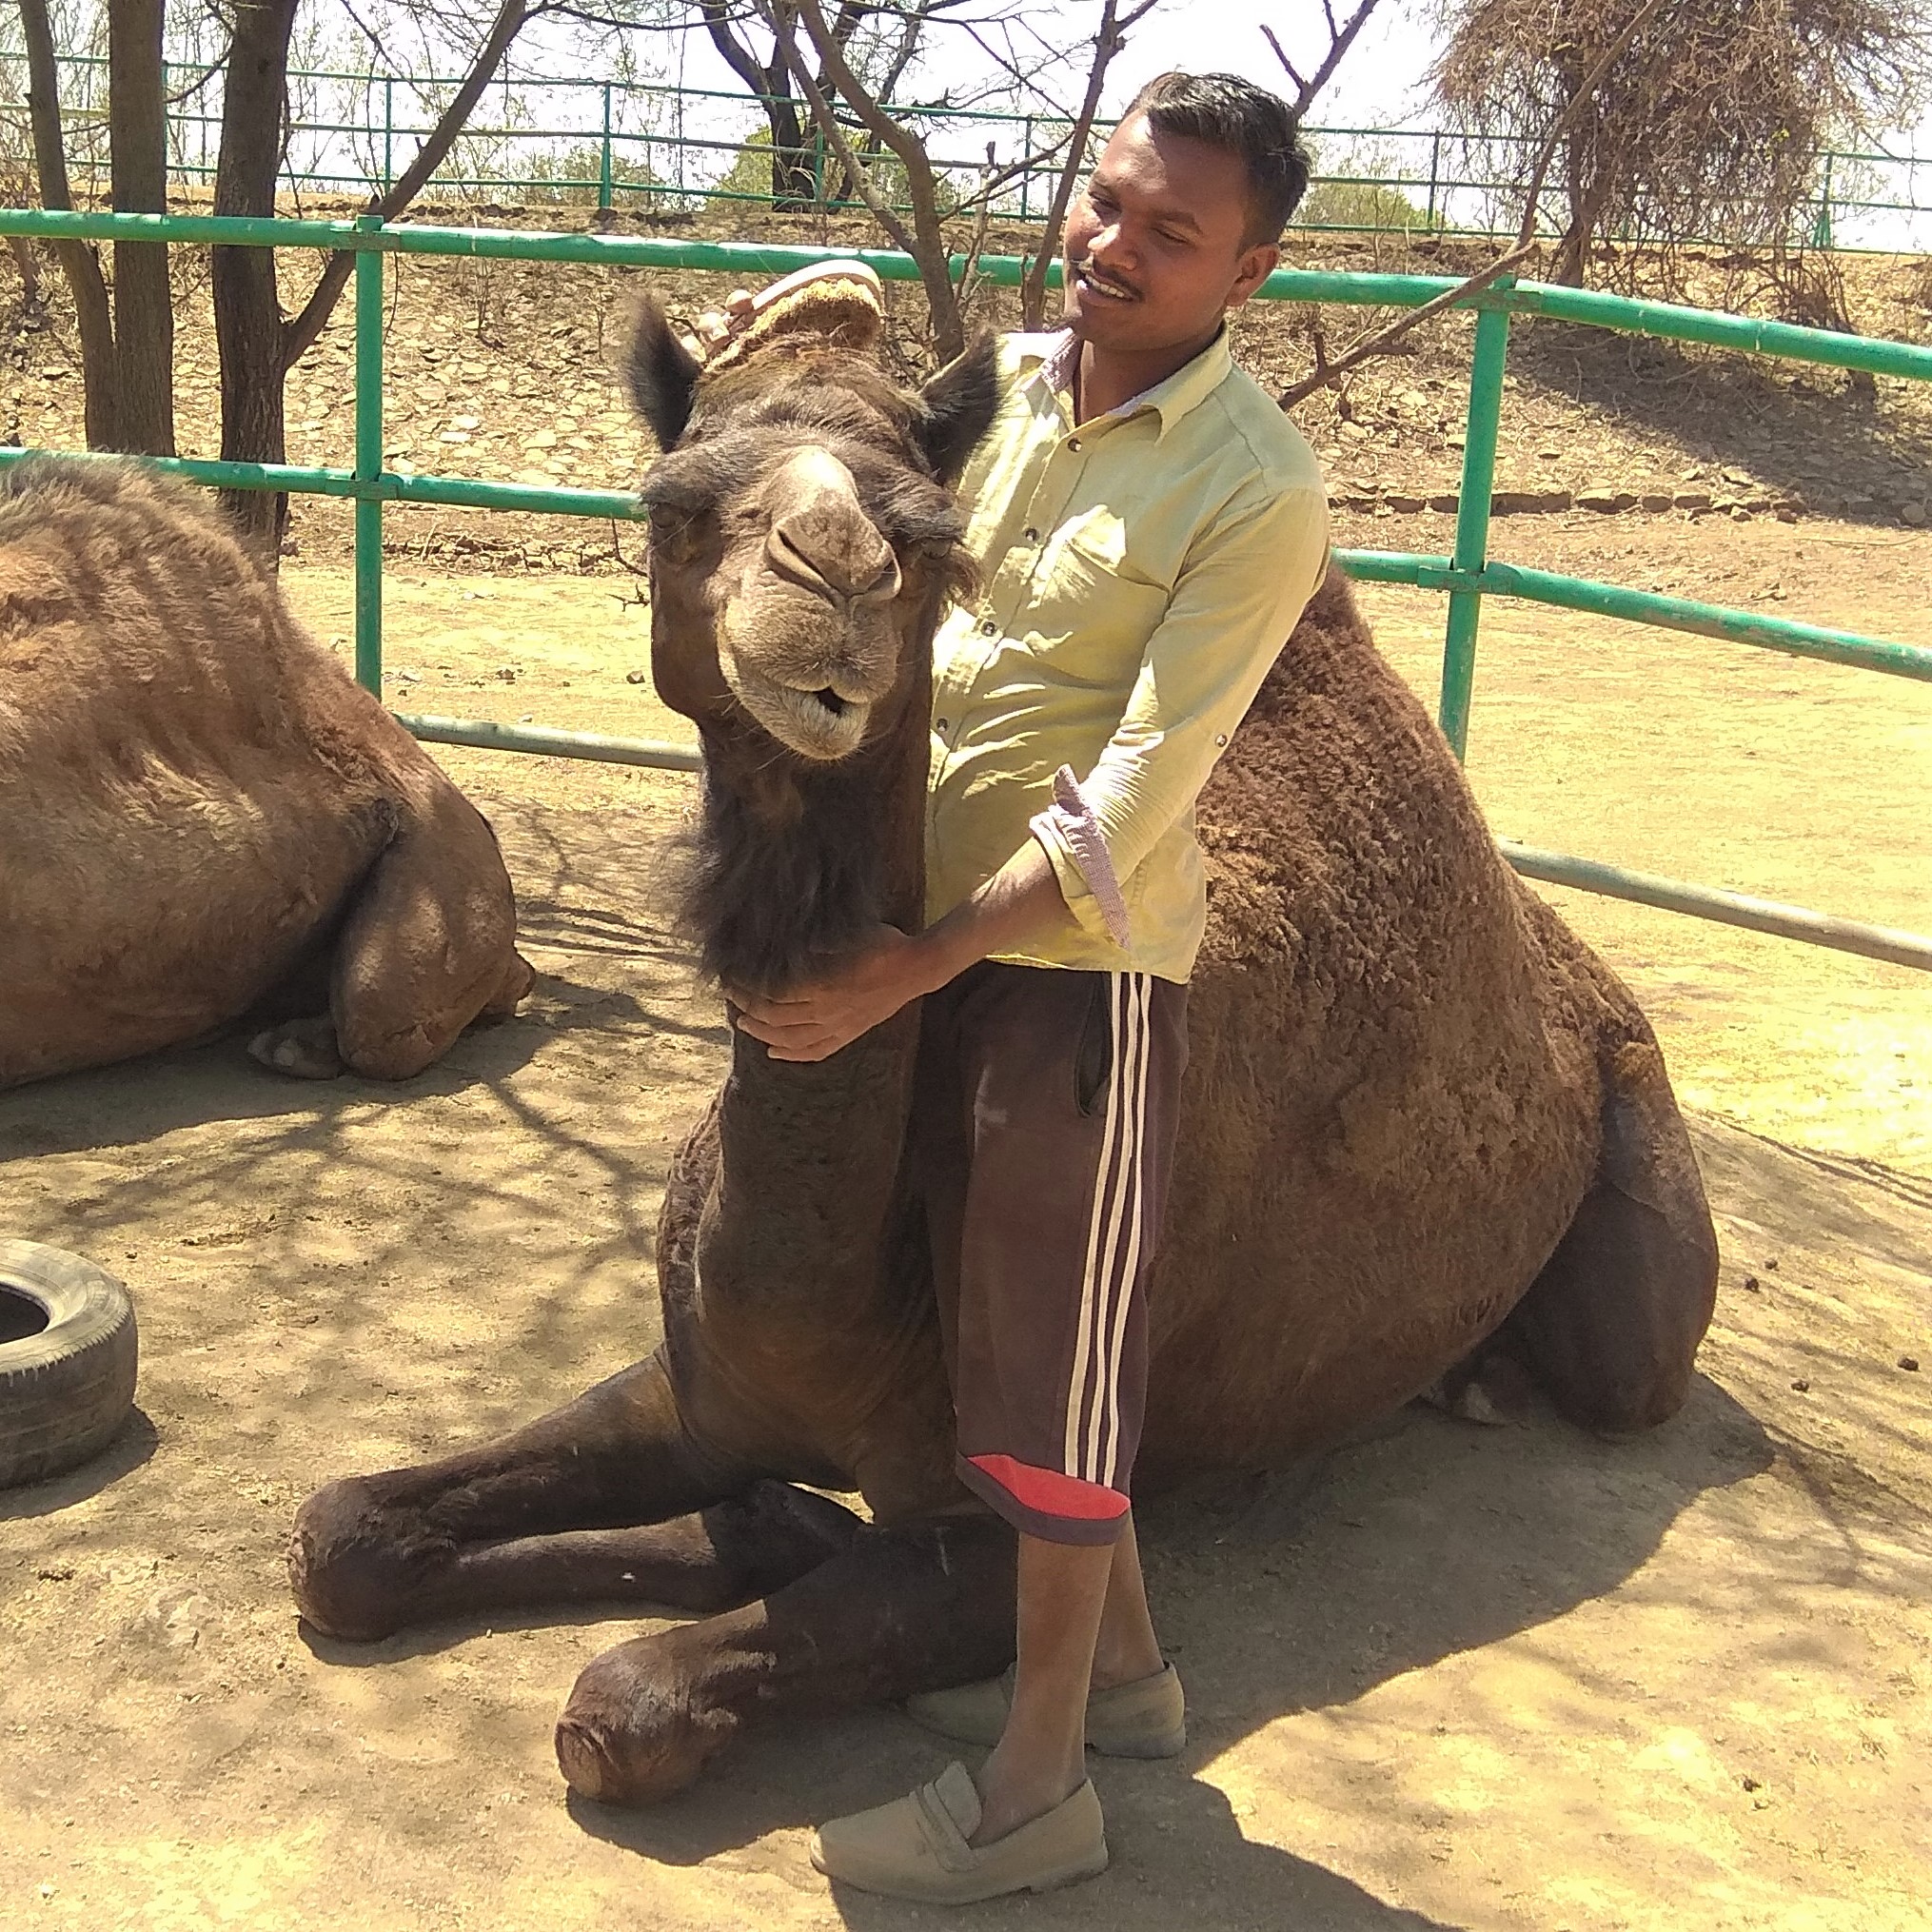 A camel sits on the ground, eyes closed and smiling, as her caretaker grooms her. The caretaker is also smiling as he gently holds her head still and brushes her fur.